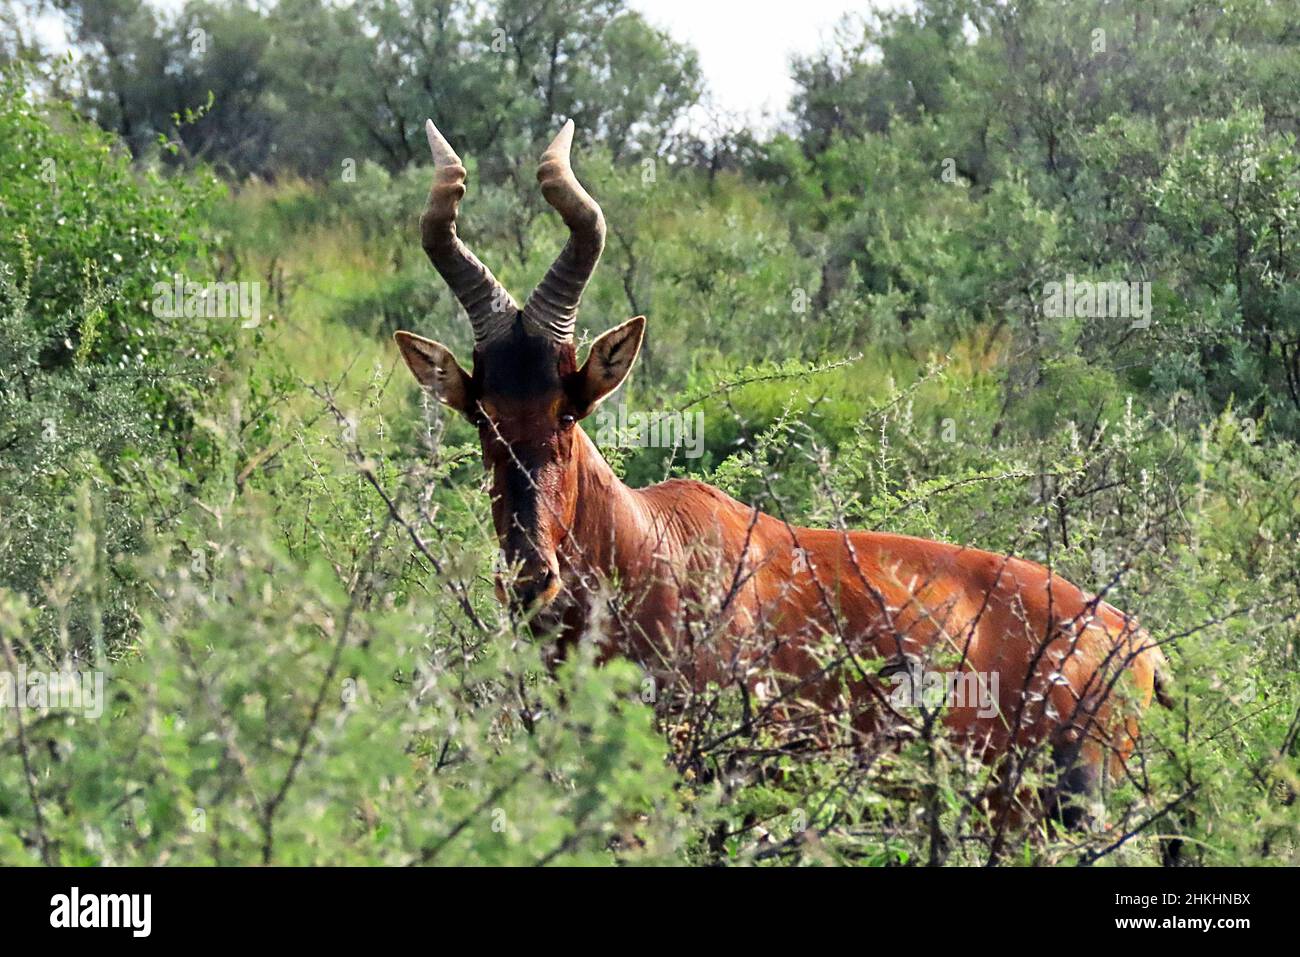 A Red Hartebeest (Alcelaphus buselaphus caama) looking at the camera through thorn trees during the wet season outside Windhoek, Namibia. Stock Photo